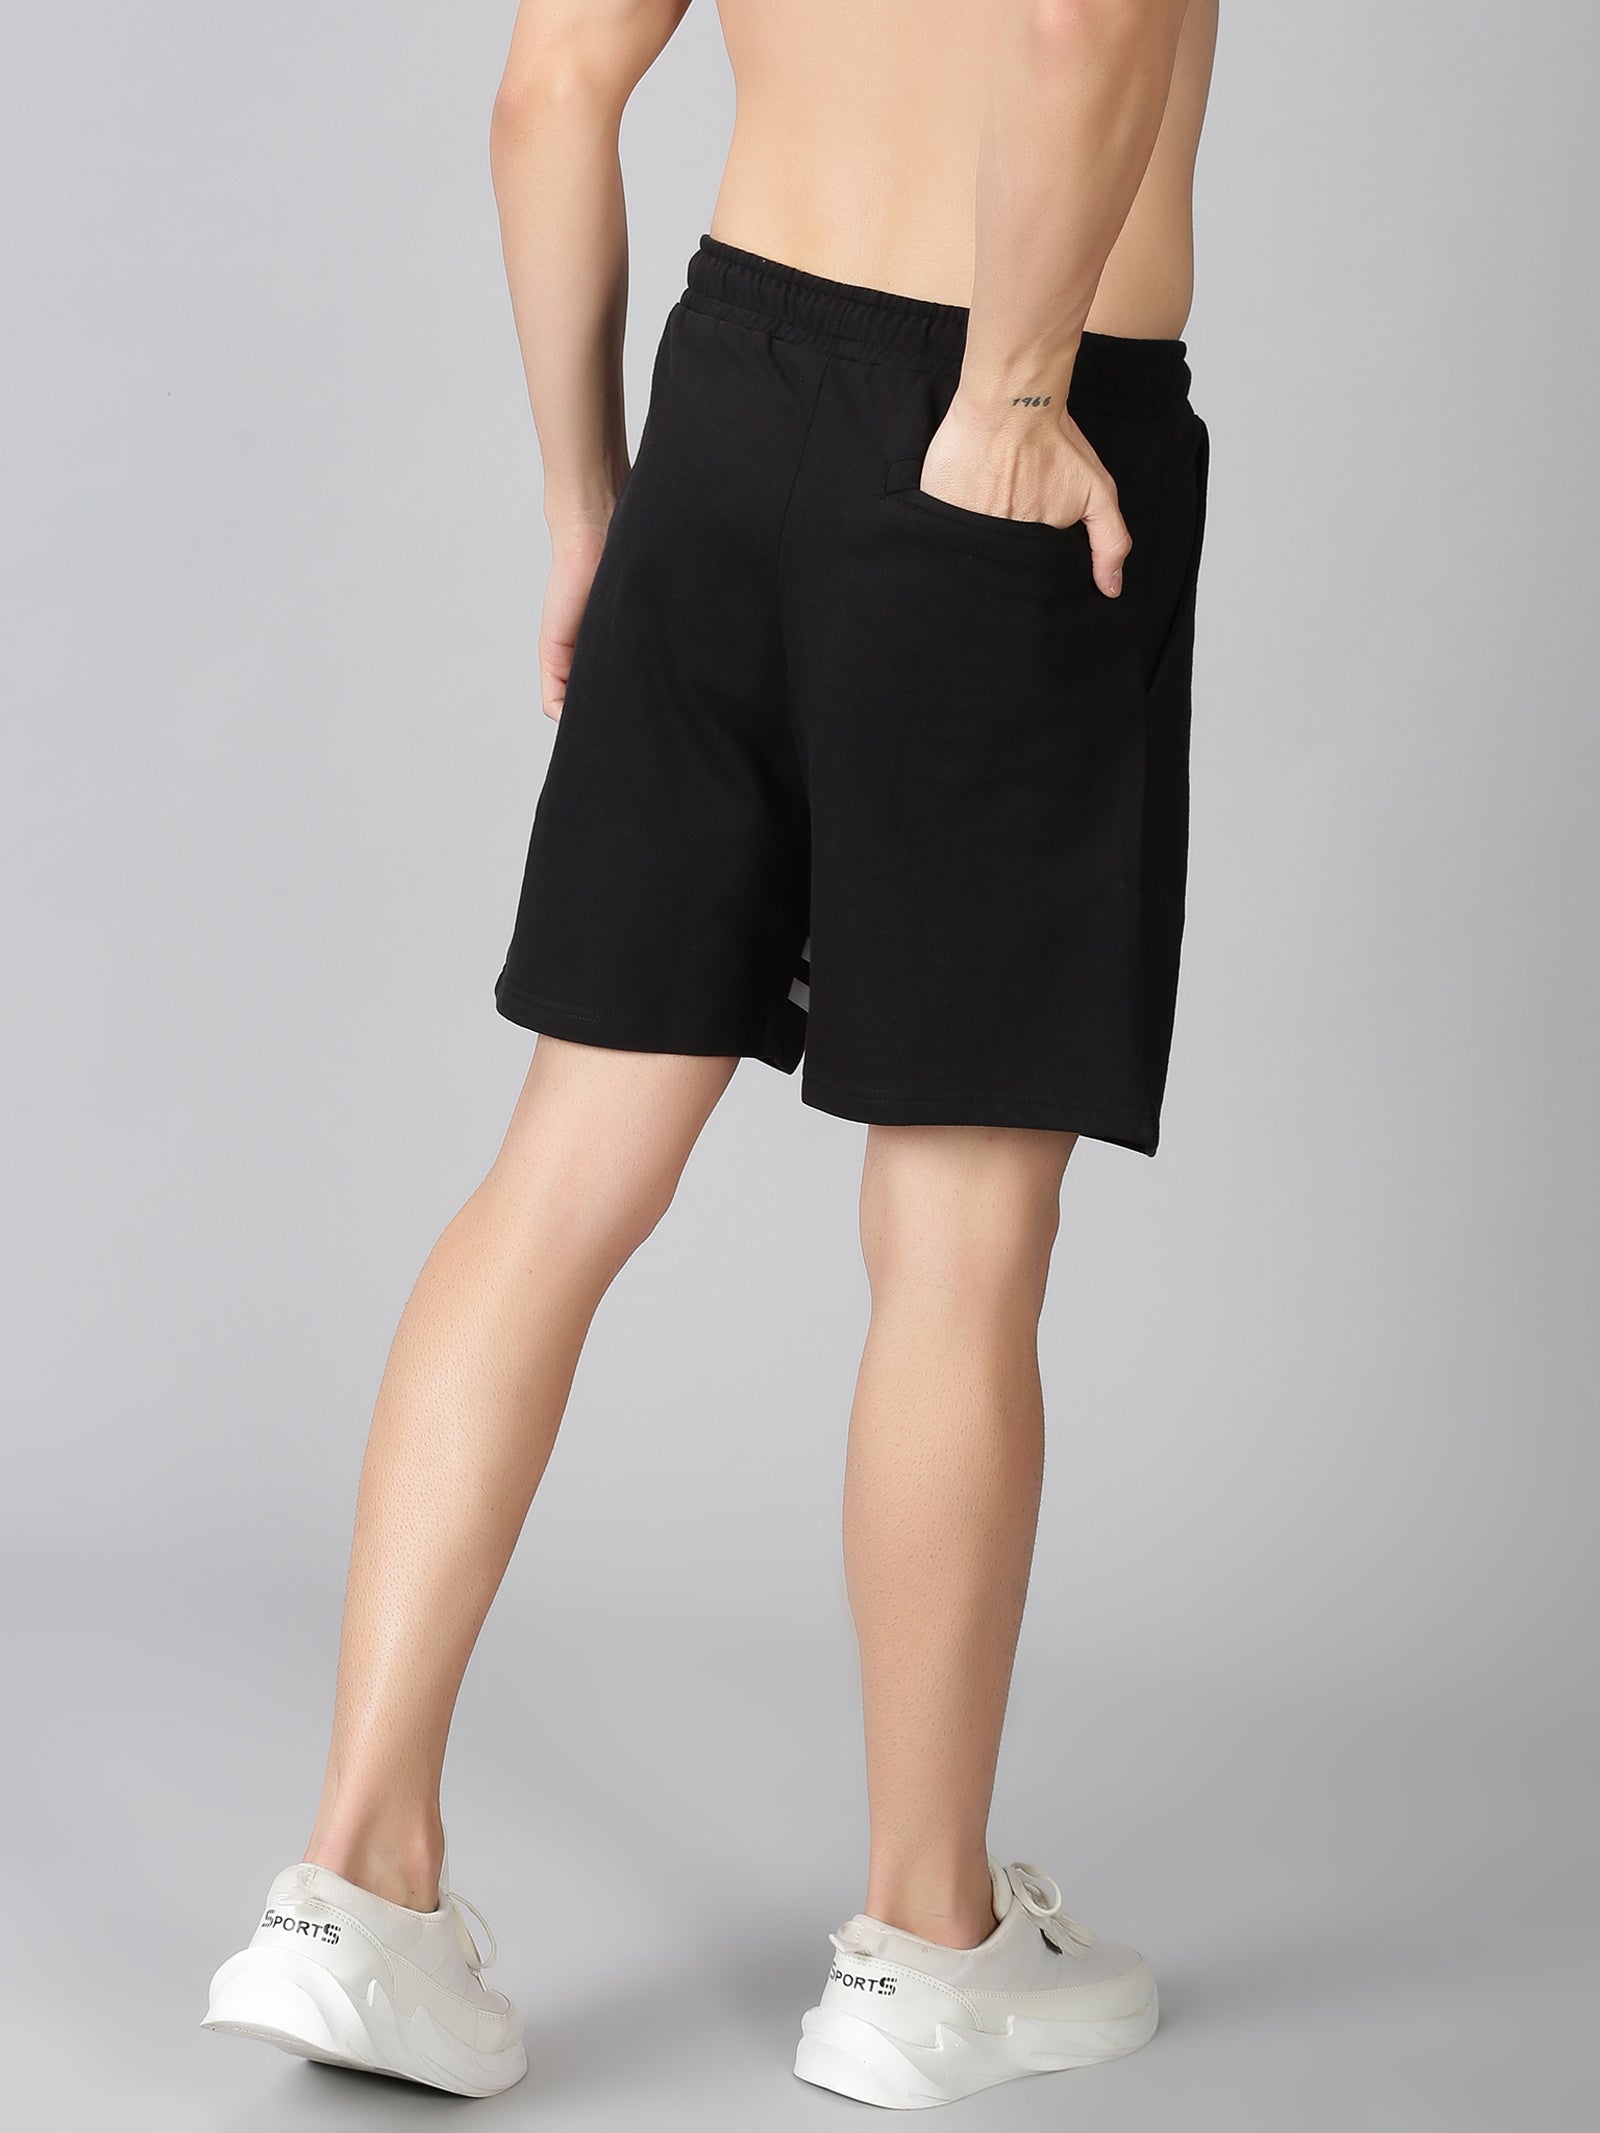 Dares Only Rudiments Black shorts